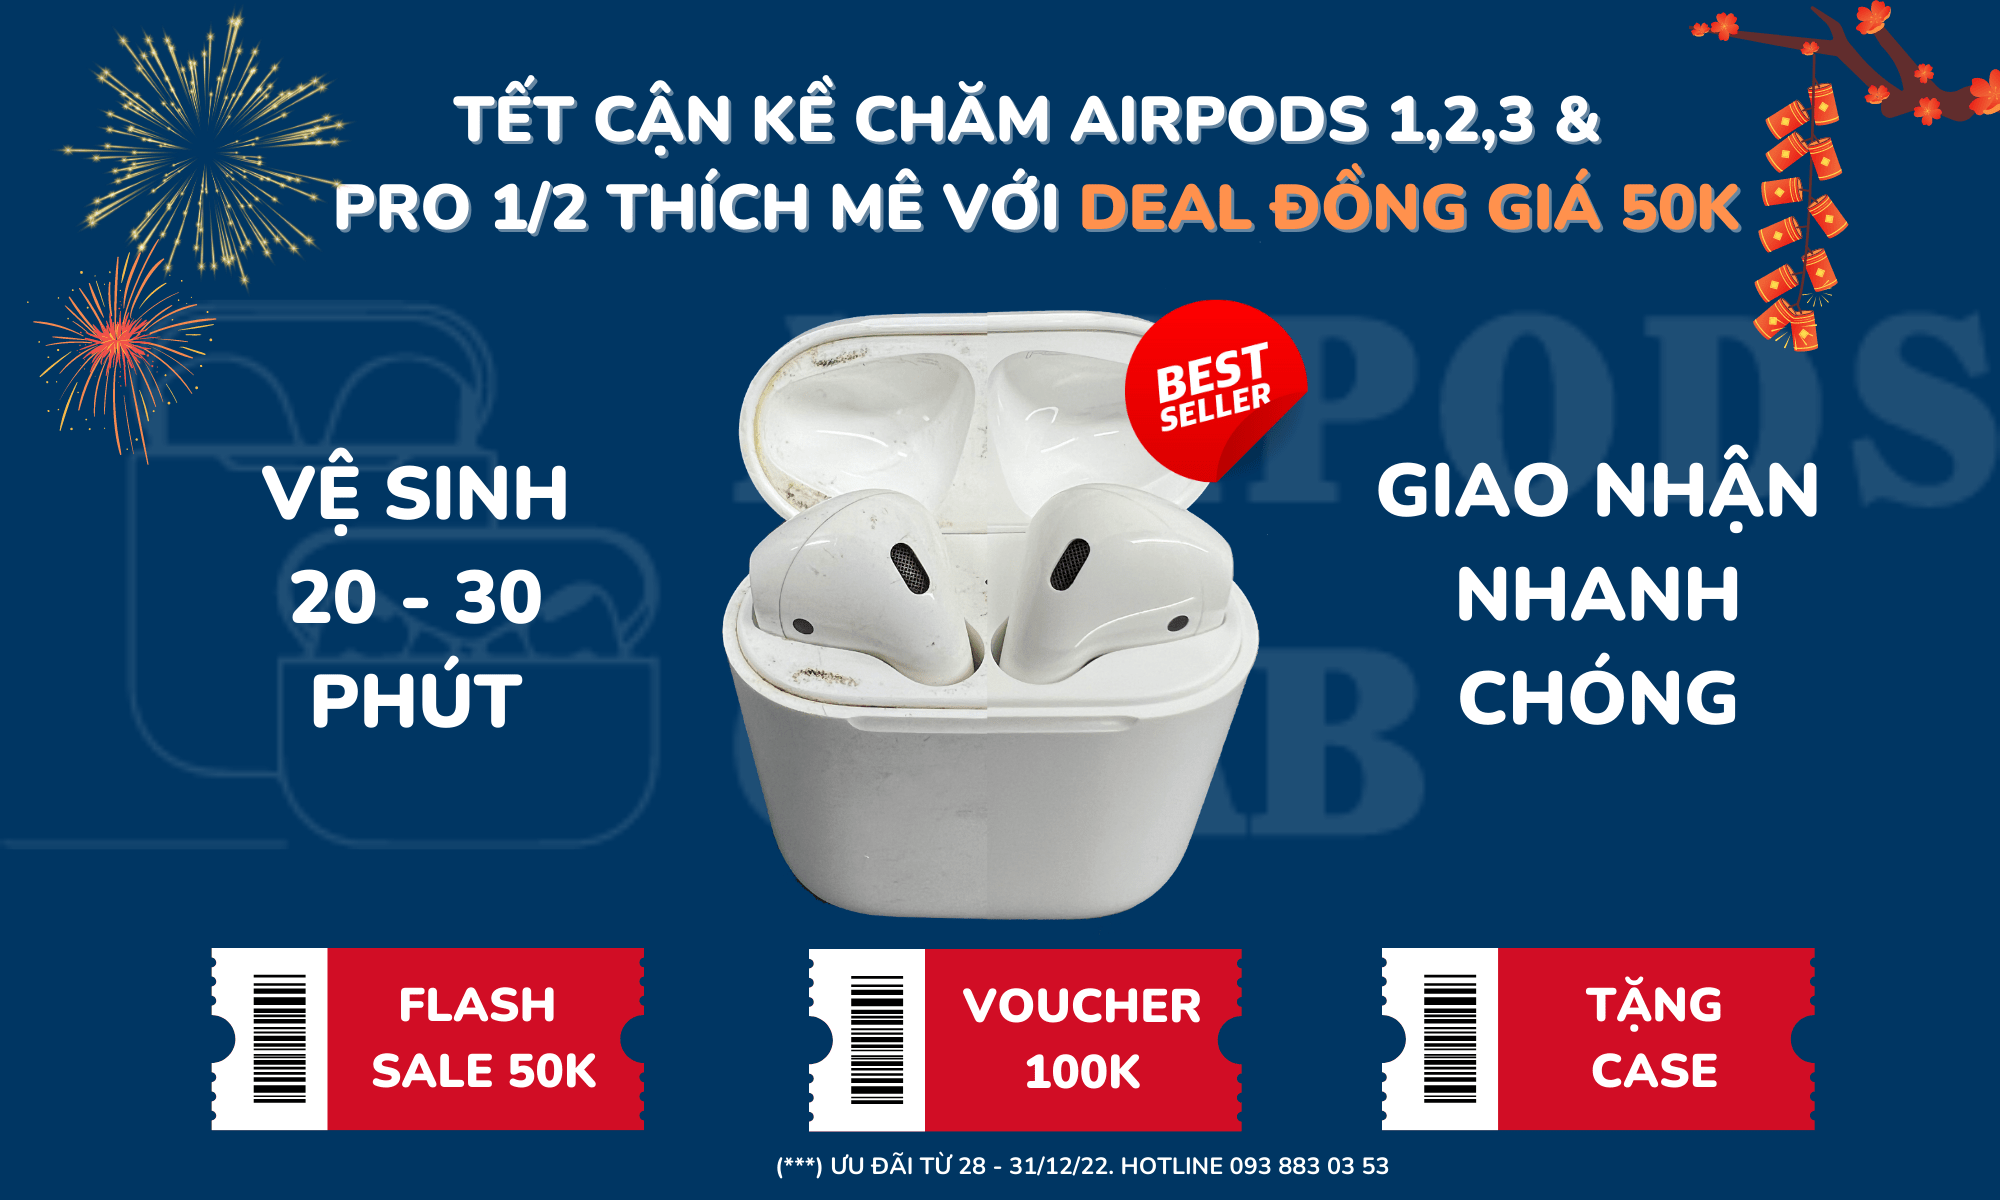 glab-tri-an-khach-hang-dong-gia-50k-ve-sinh-airpods (1)